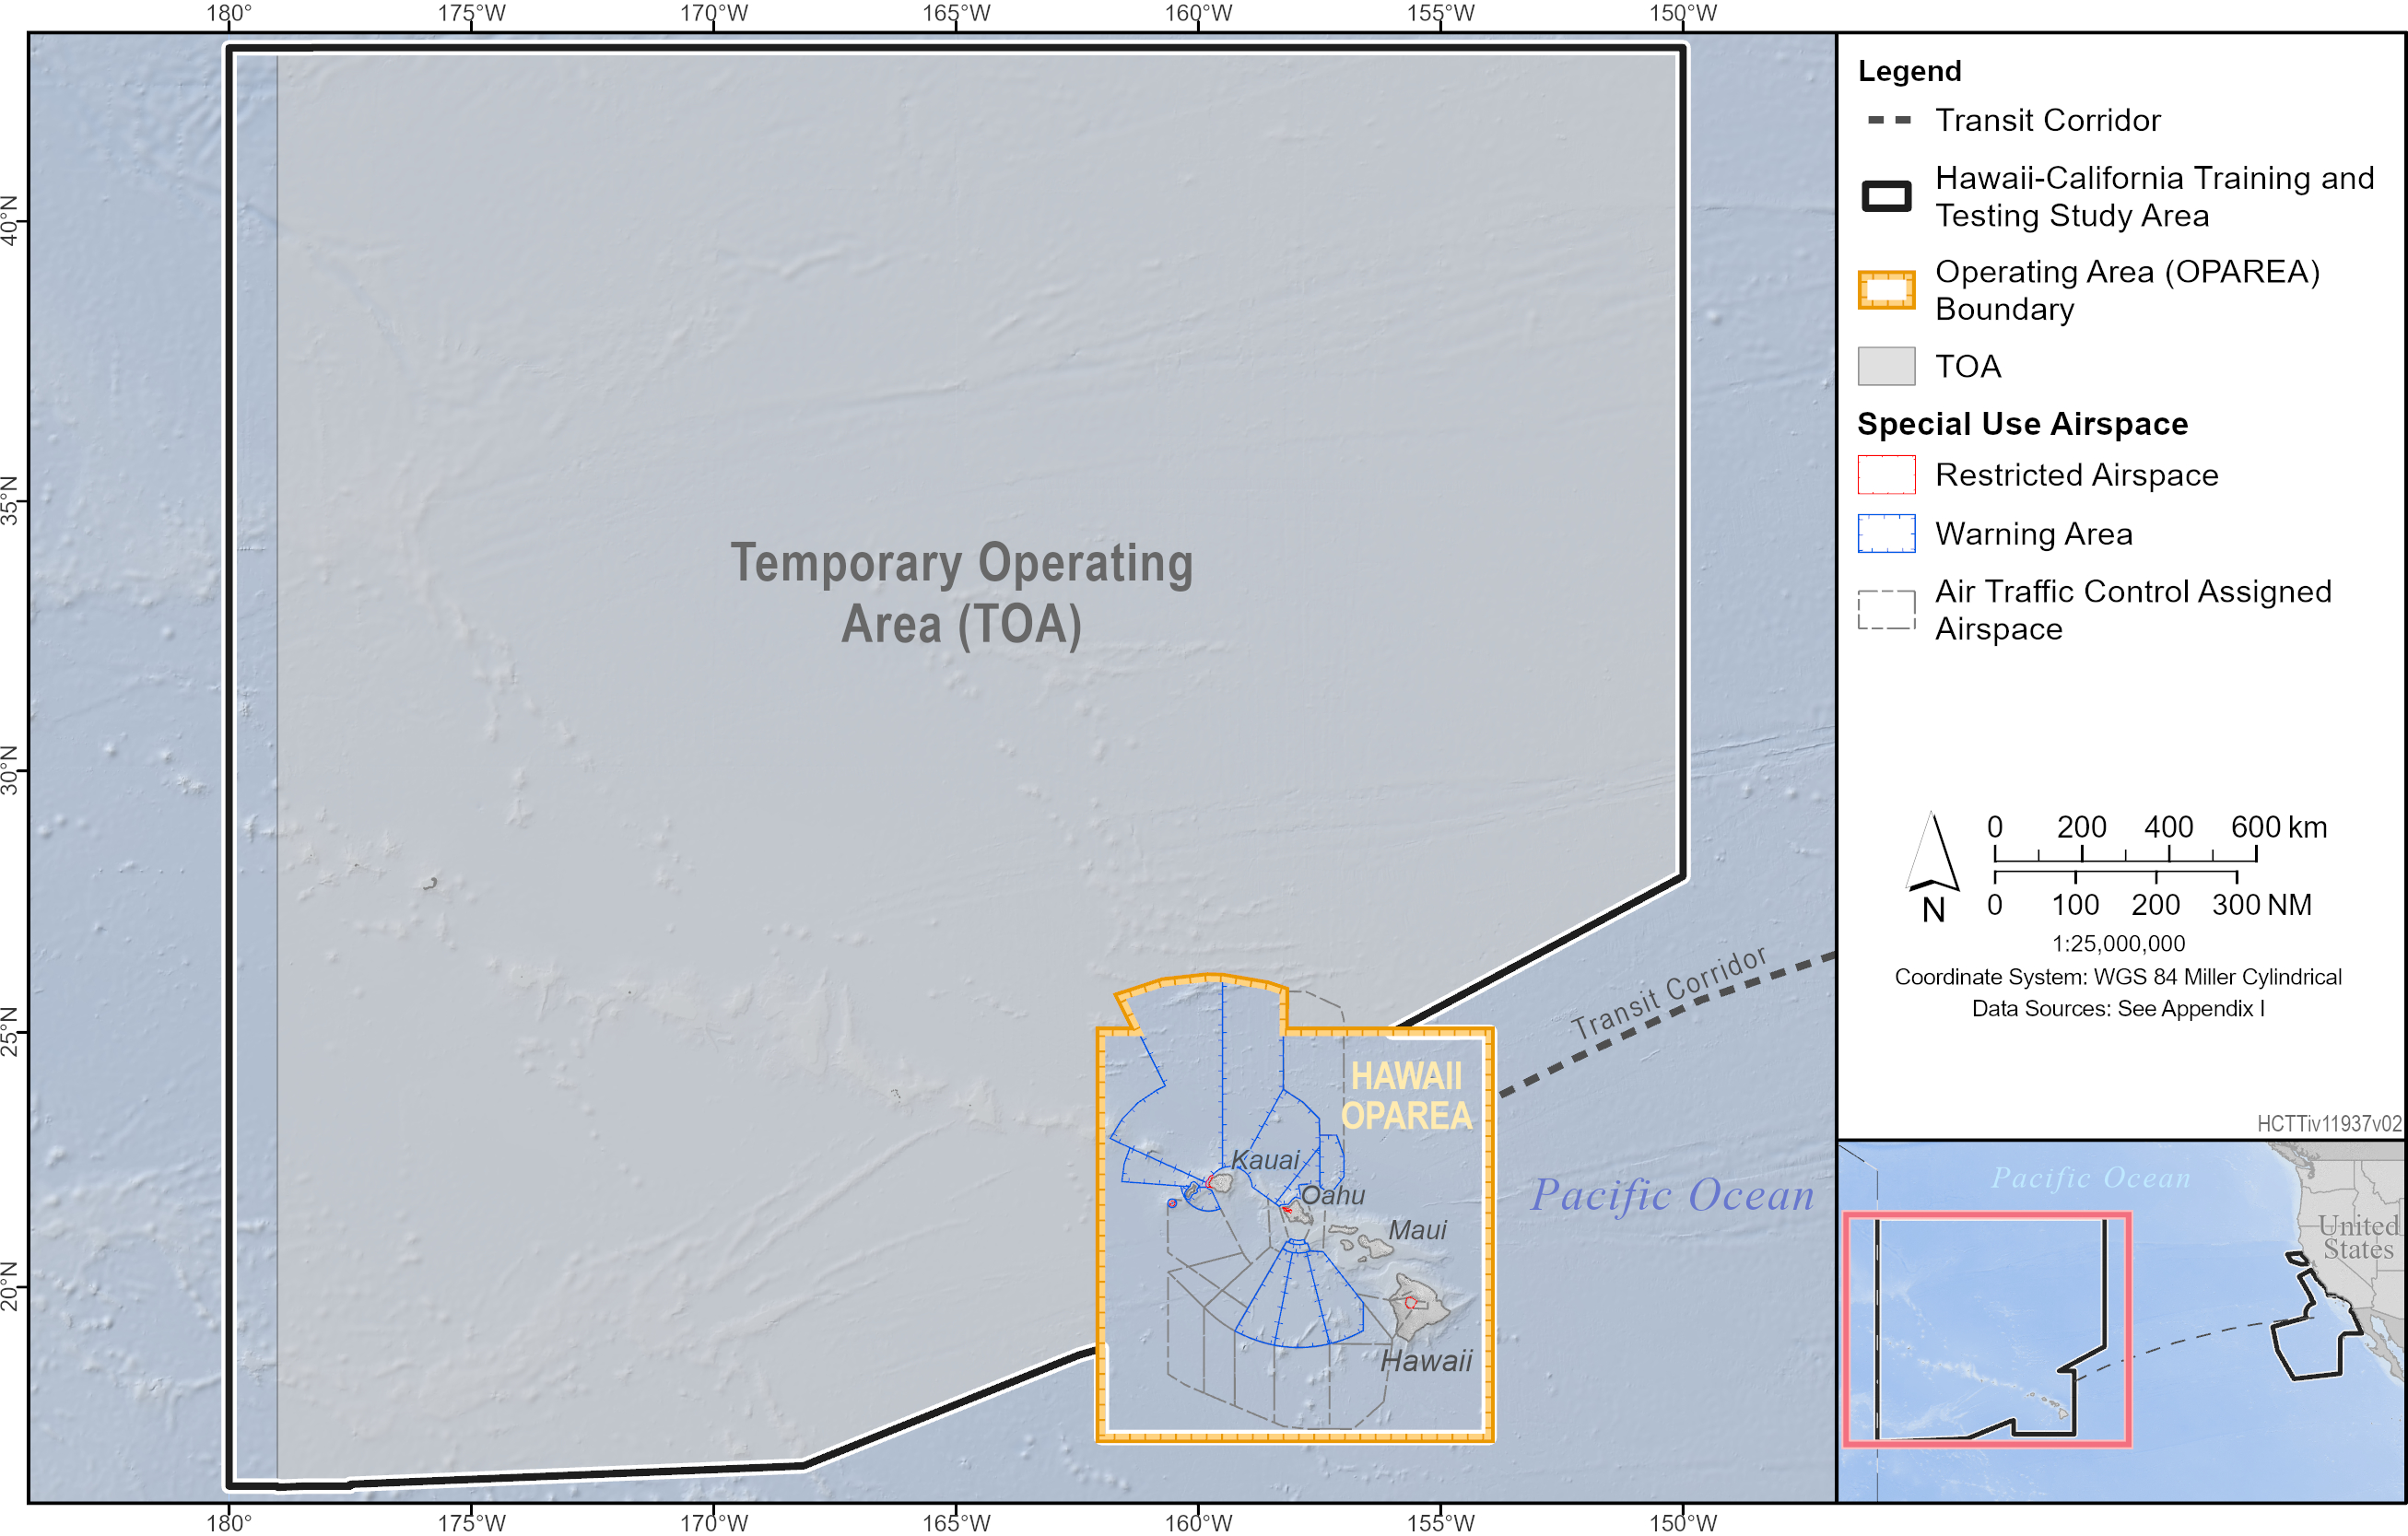 This is an image of a map showing the Hawaii portion of the Hawaii-California Training and Testing Study Area. The map is showing the Temporary Operating Area, Hawaii Operating Area boundary, transit corridor, restricted airspace, warning area, and Air Traffic Control Assigned Airspace.